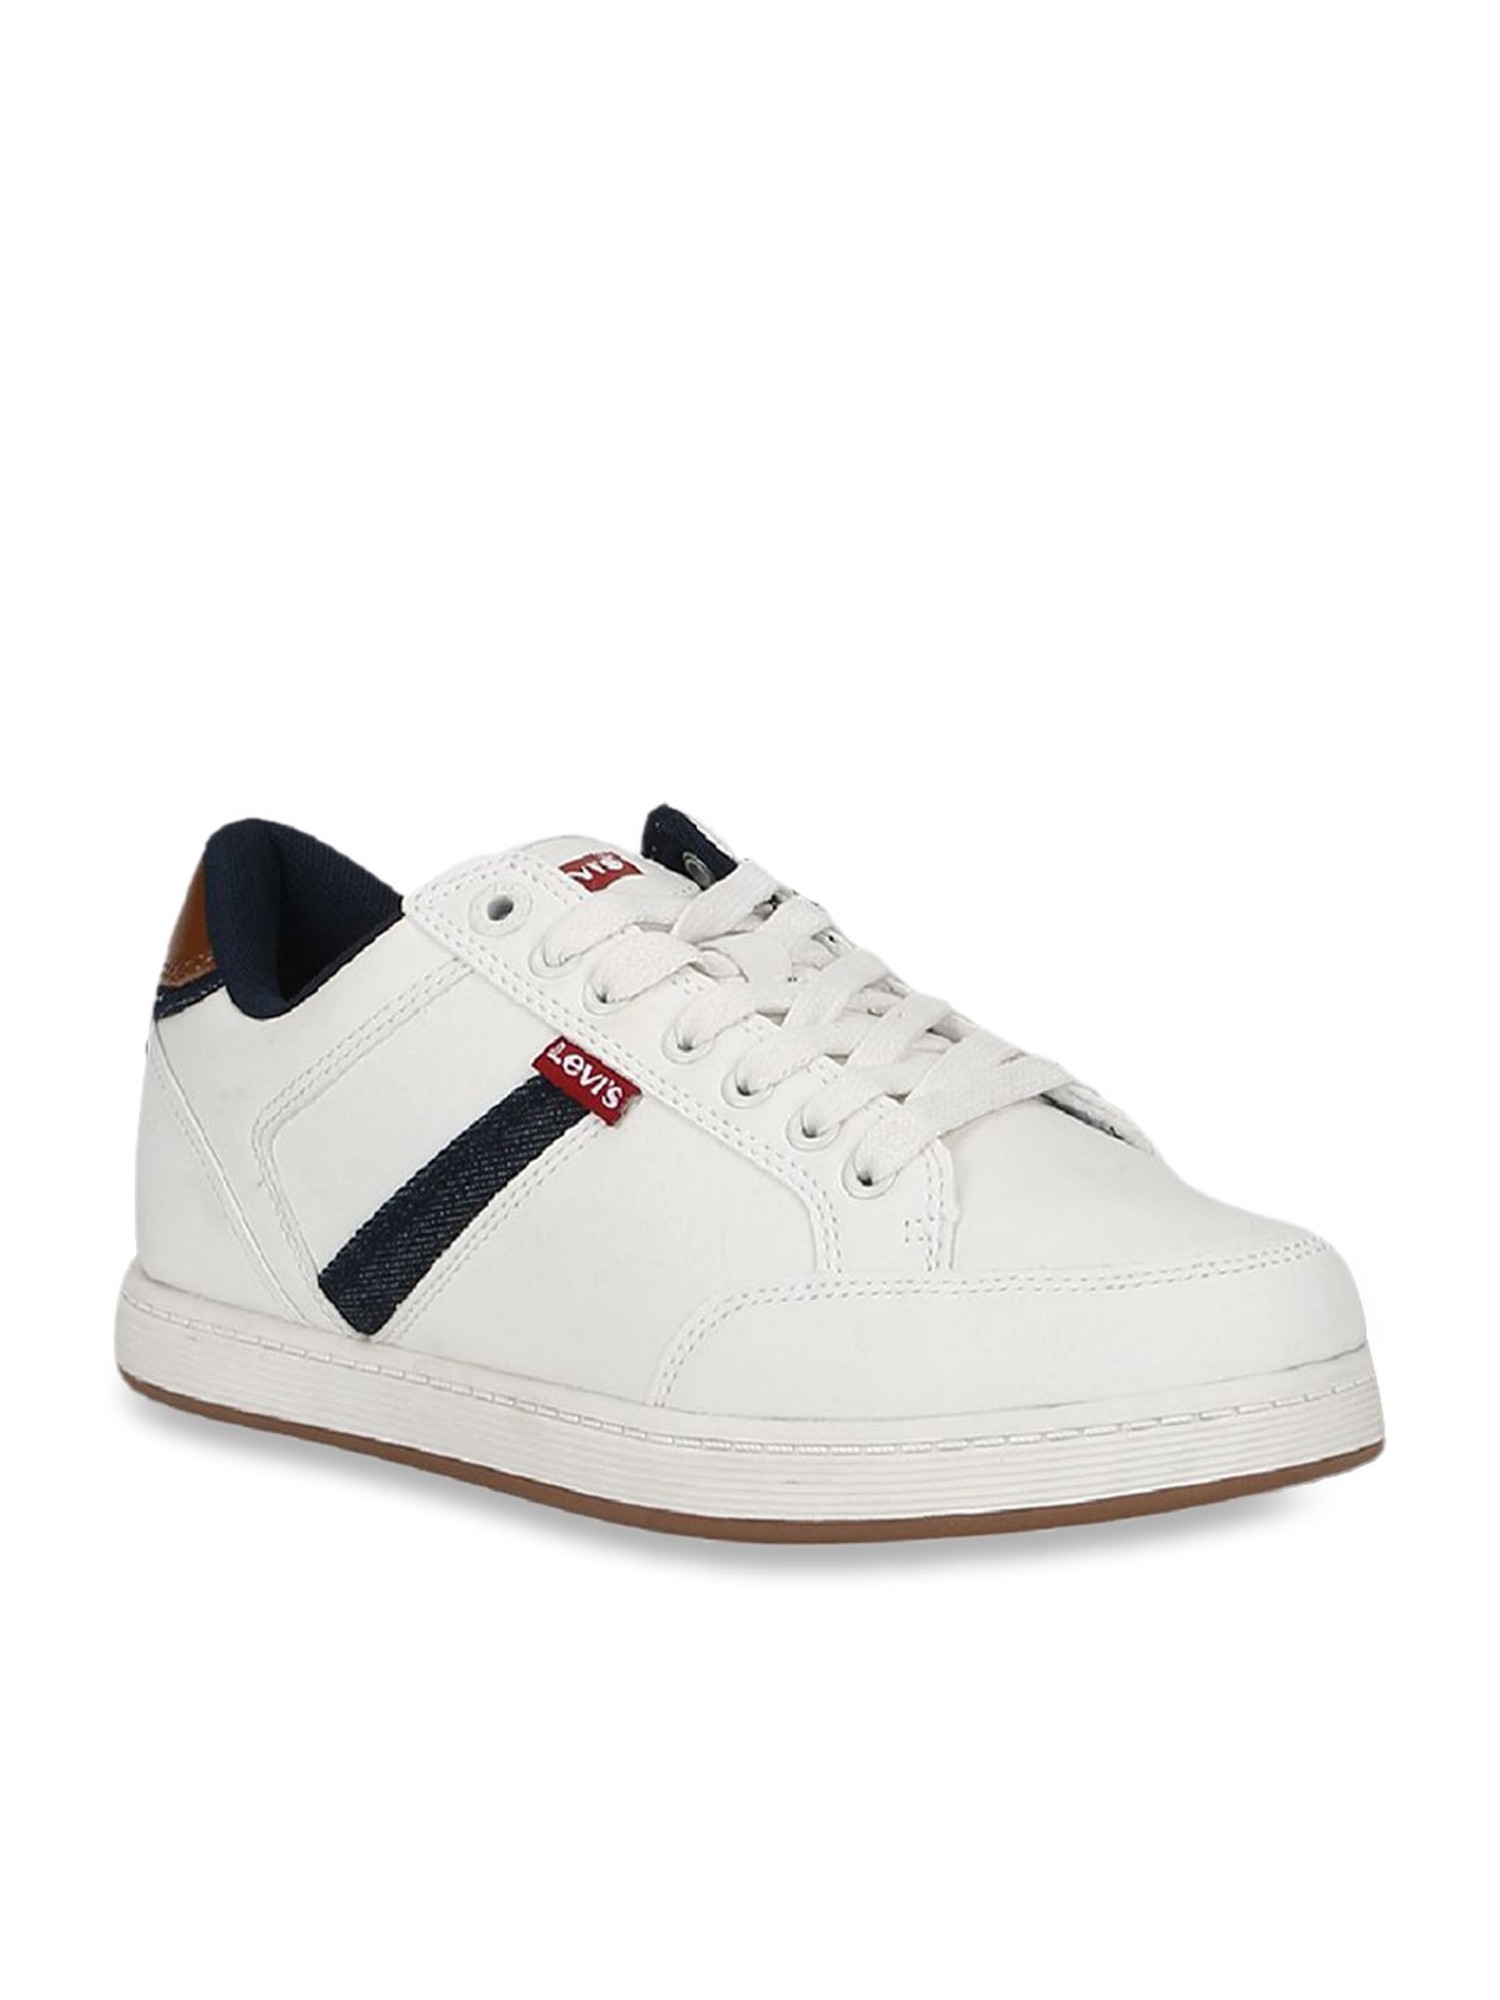 Levi's Womens Drive Lo Synthetic Leather Casual Lace Up Sneaker Shoe -  Walmart.com